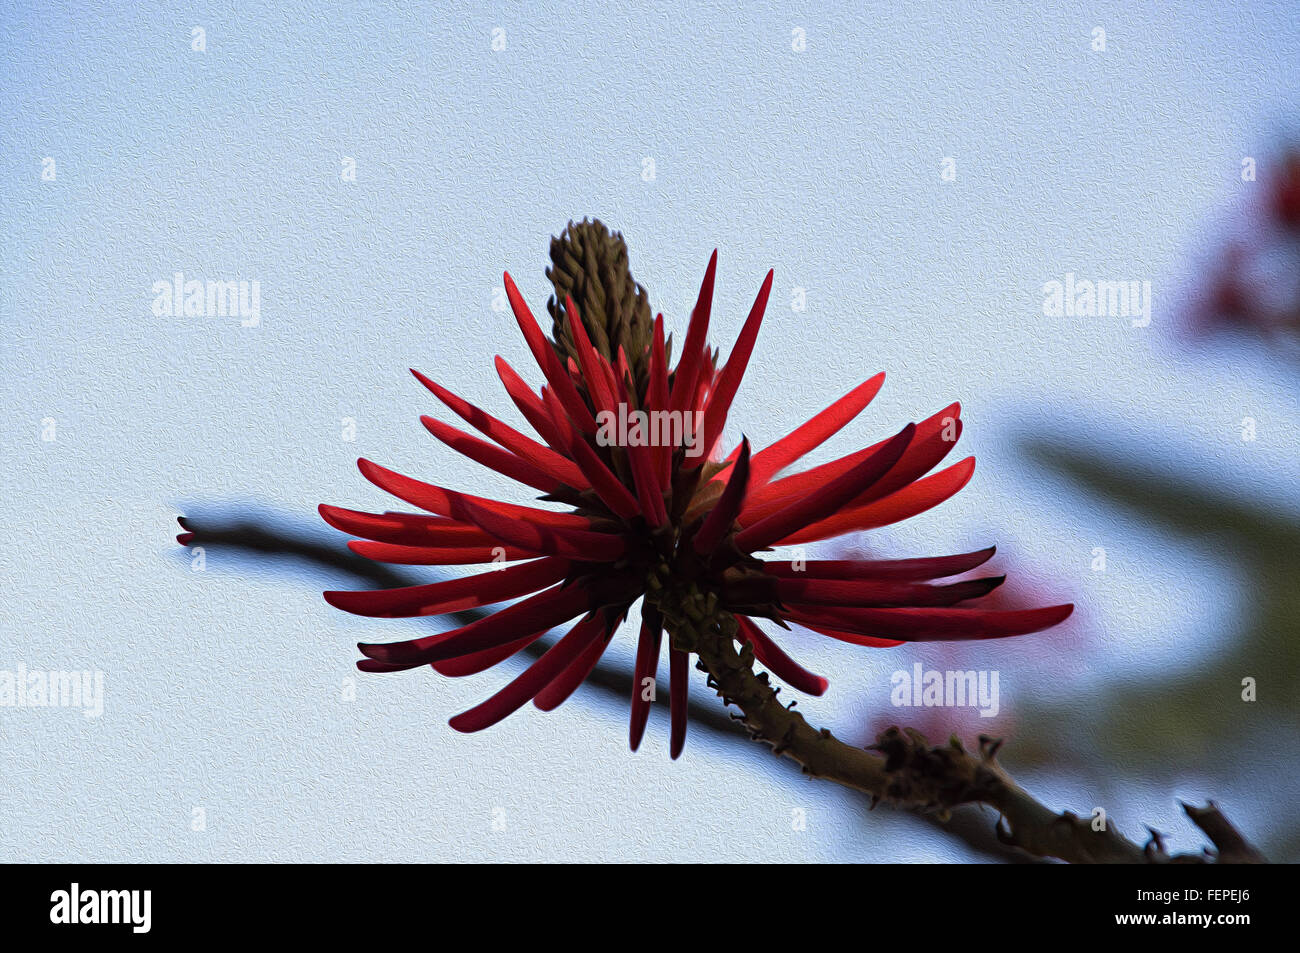 Eritrina, coral tree covered with red flowers Stock Photo